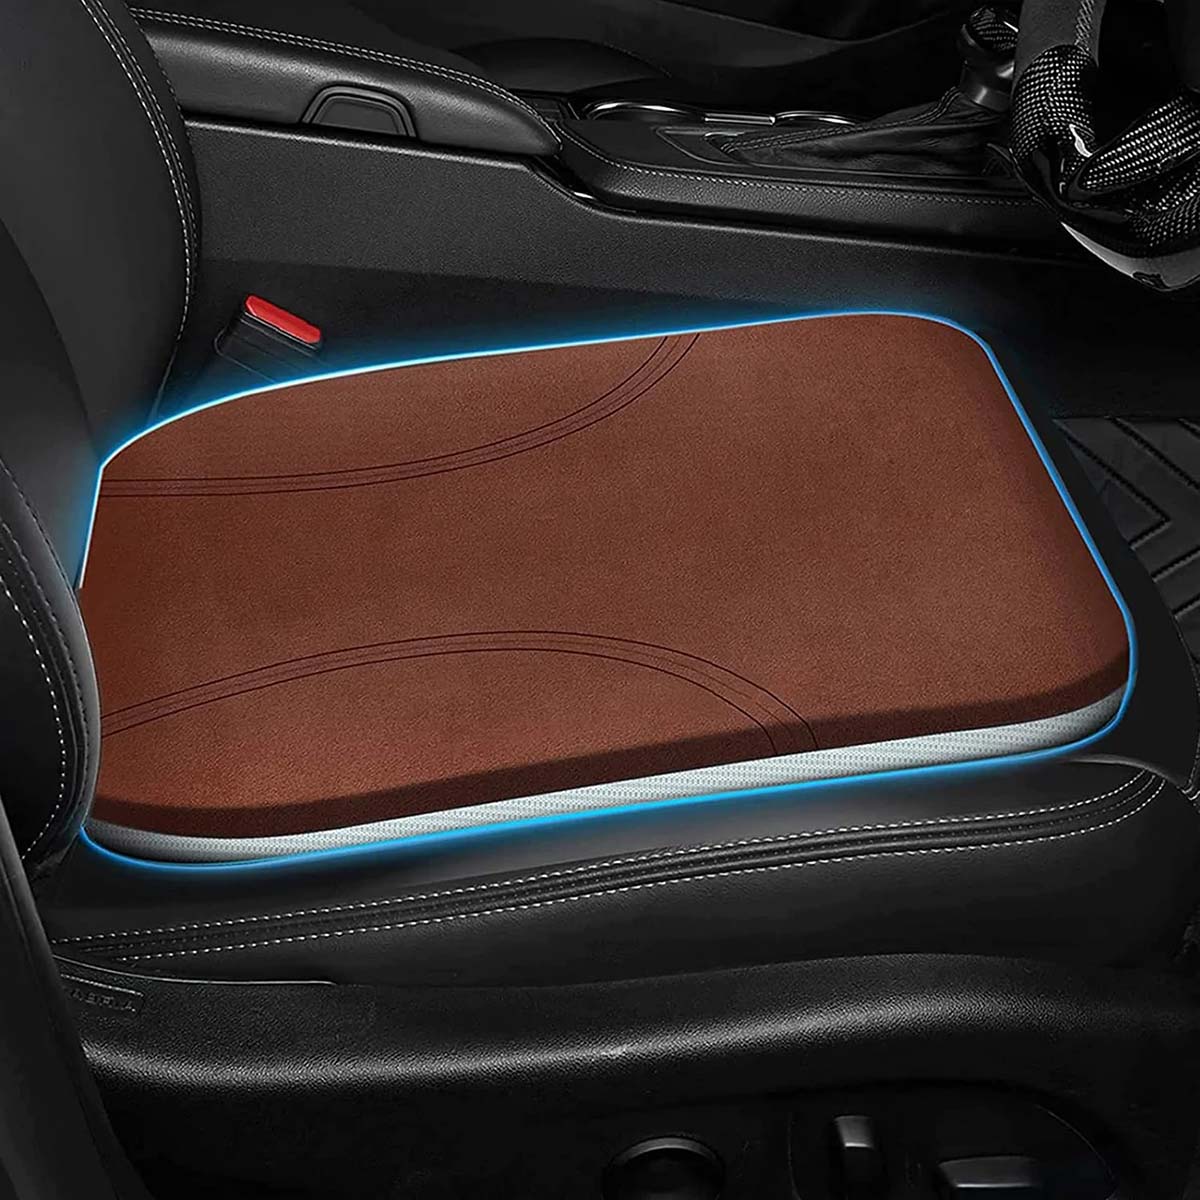 Car Seat Cushion, Custom Fit For Car, Car Memory Foam Seat Cushion, Heightening Seat Cushion, Seat Cushion for Car and Office Chair WAHY224